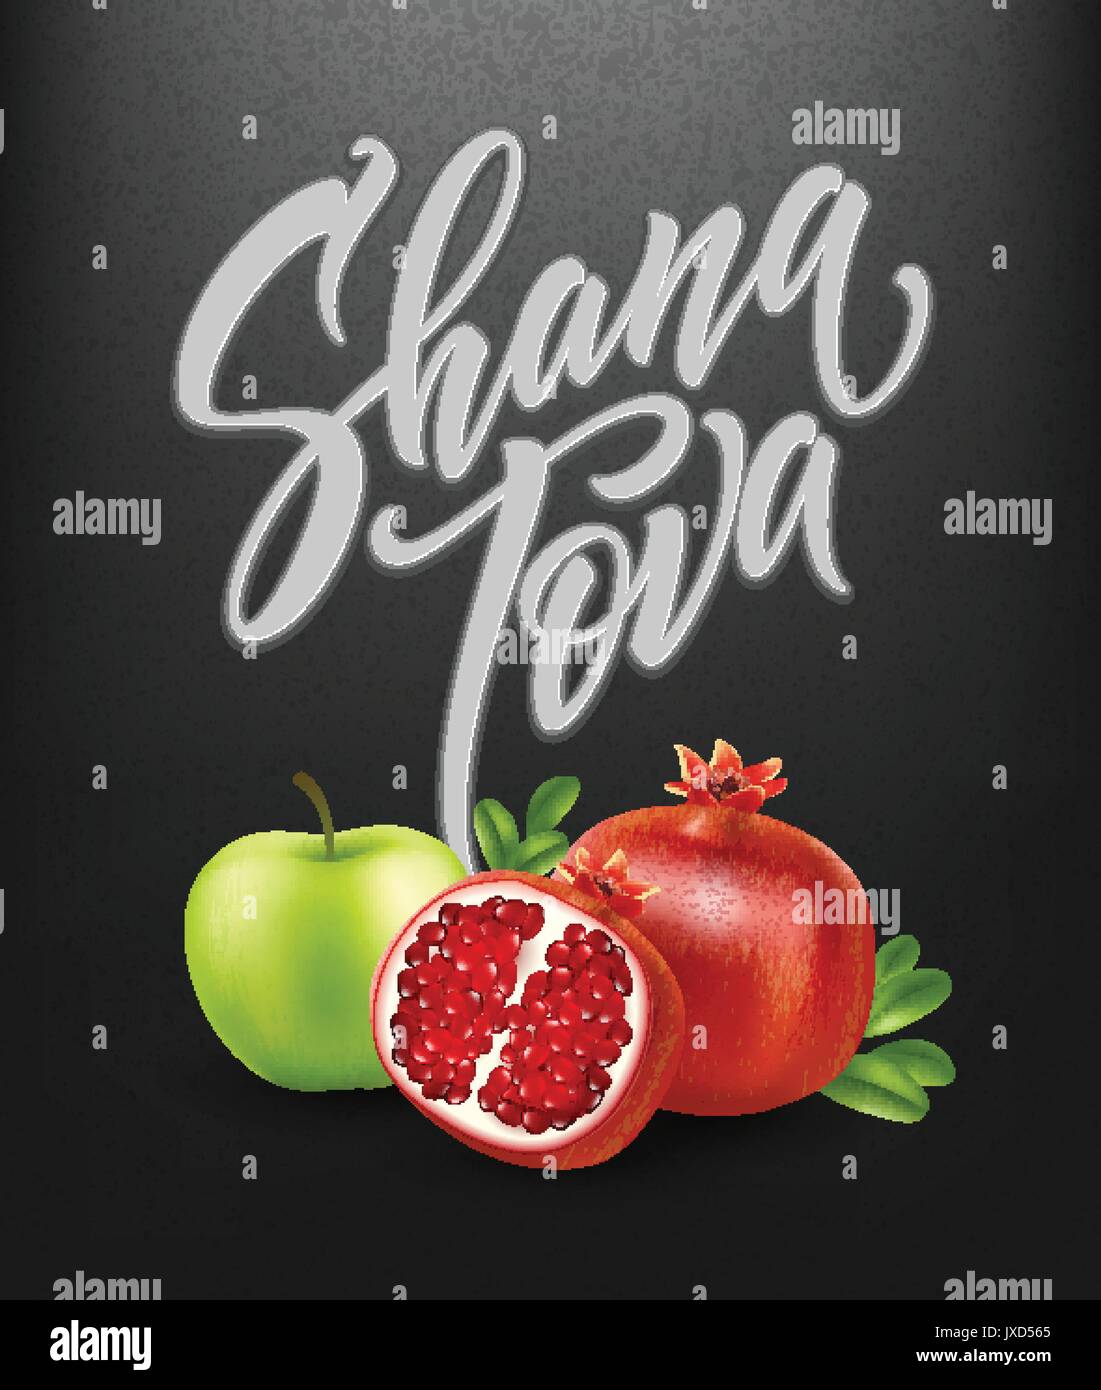 A greeting card with stylish lettering Shana Tova. Vector illustration Stock Vector